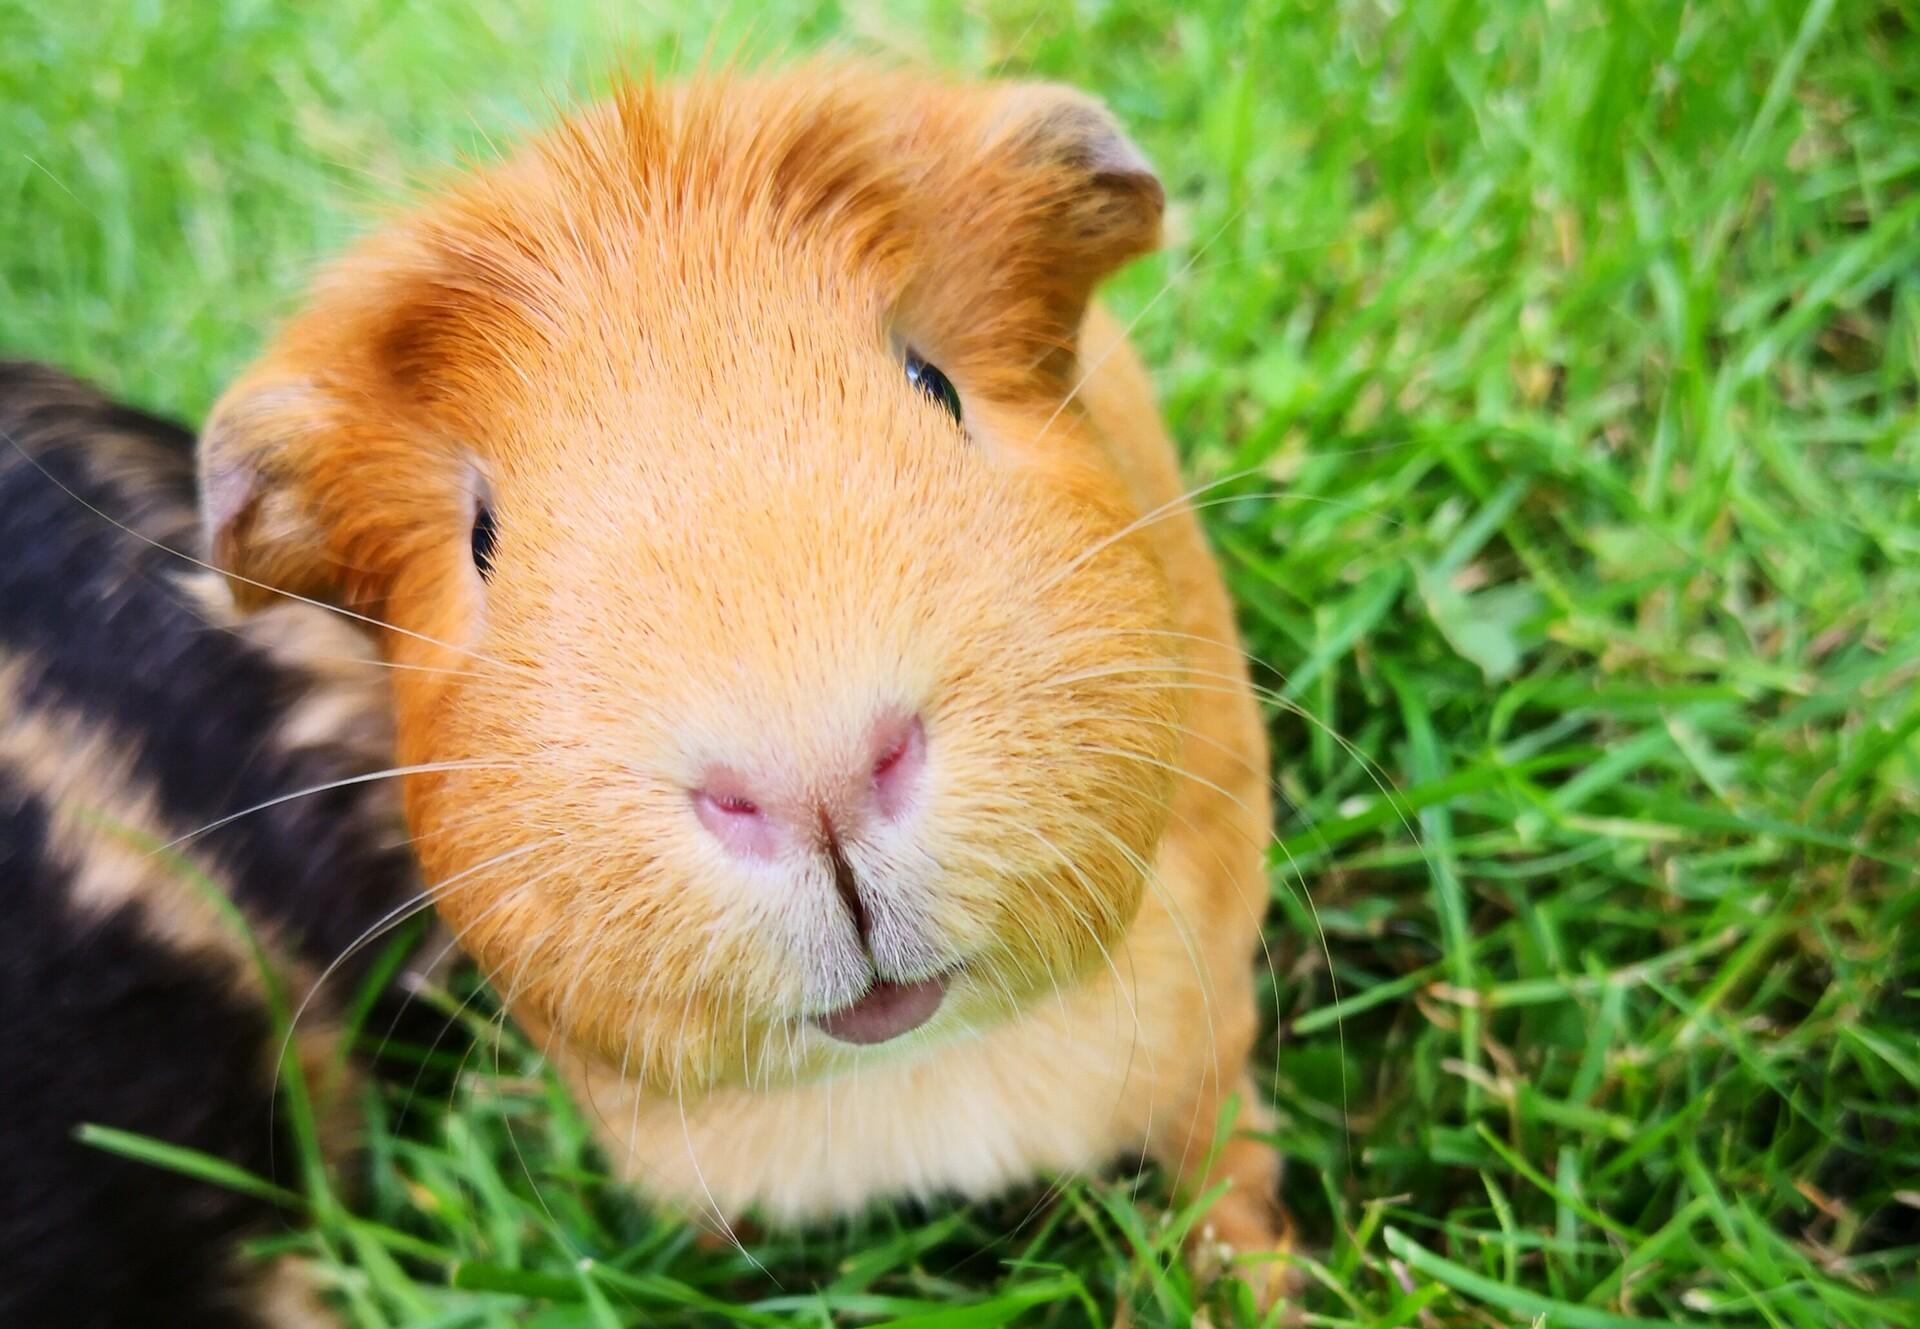 Why do guinea pigs live in South America?